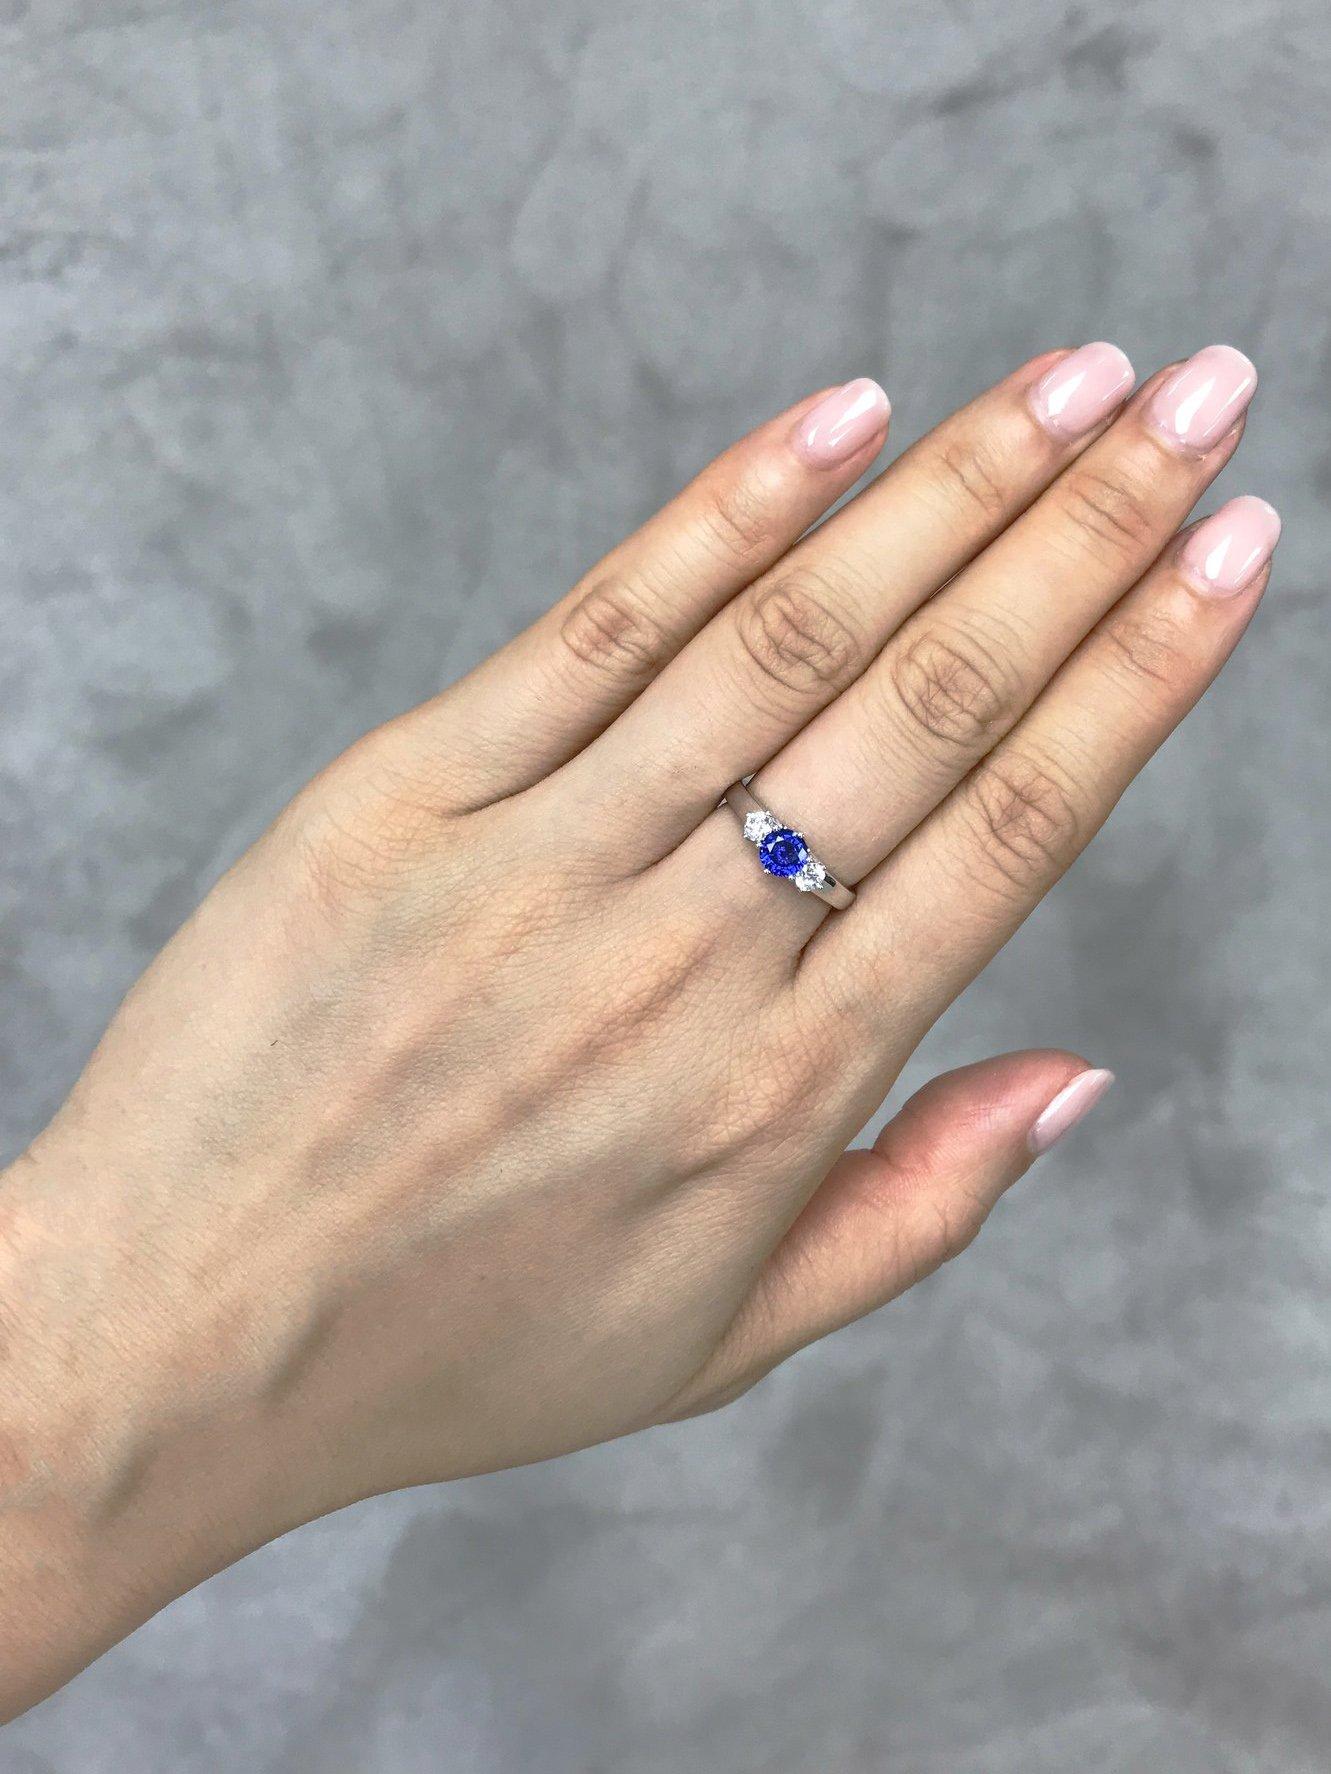 This brilliant three-stone engagement ring is set in 18K white gold. The center stone, a 5mm round cut natural blue sapphire is set in a four prong setting and adorned by two round cut 3mm natural white sapphire. 

Specifications:
5mm Round Cut